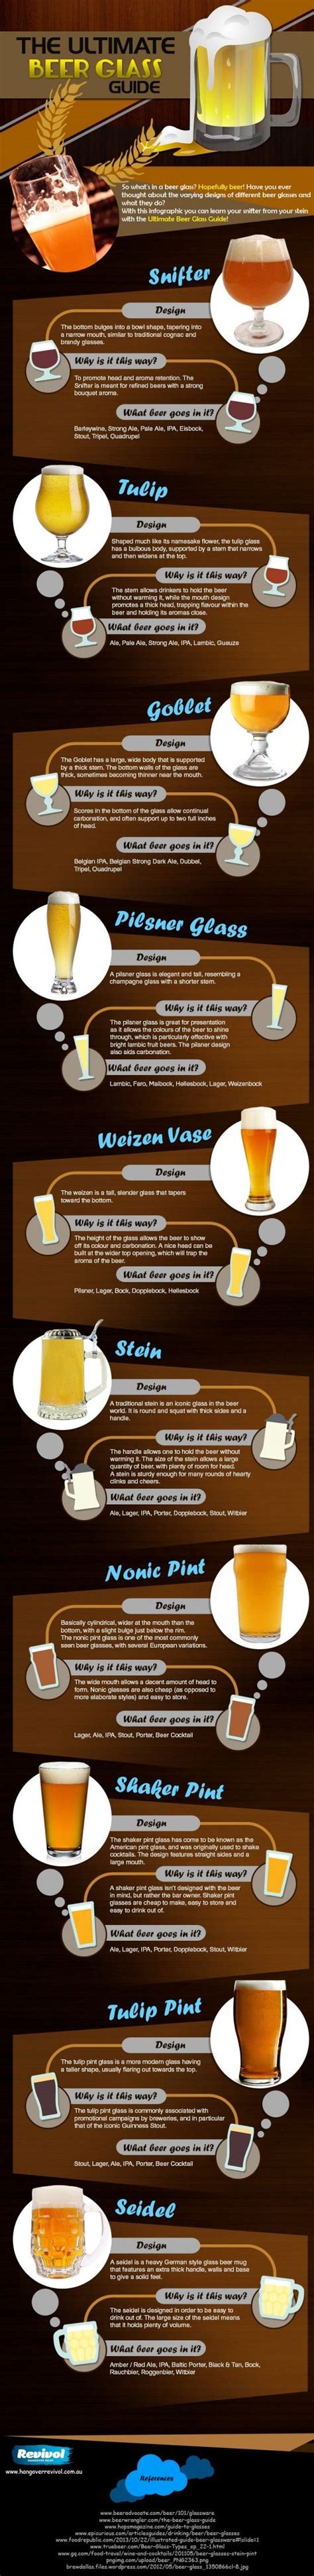 Why There Are So Many Glasses For Beer And Which Goes In What Glass